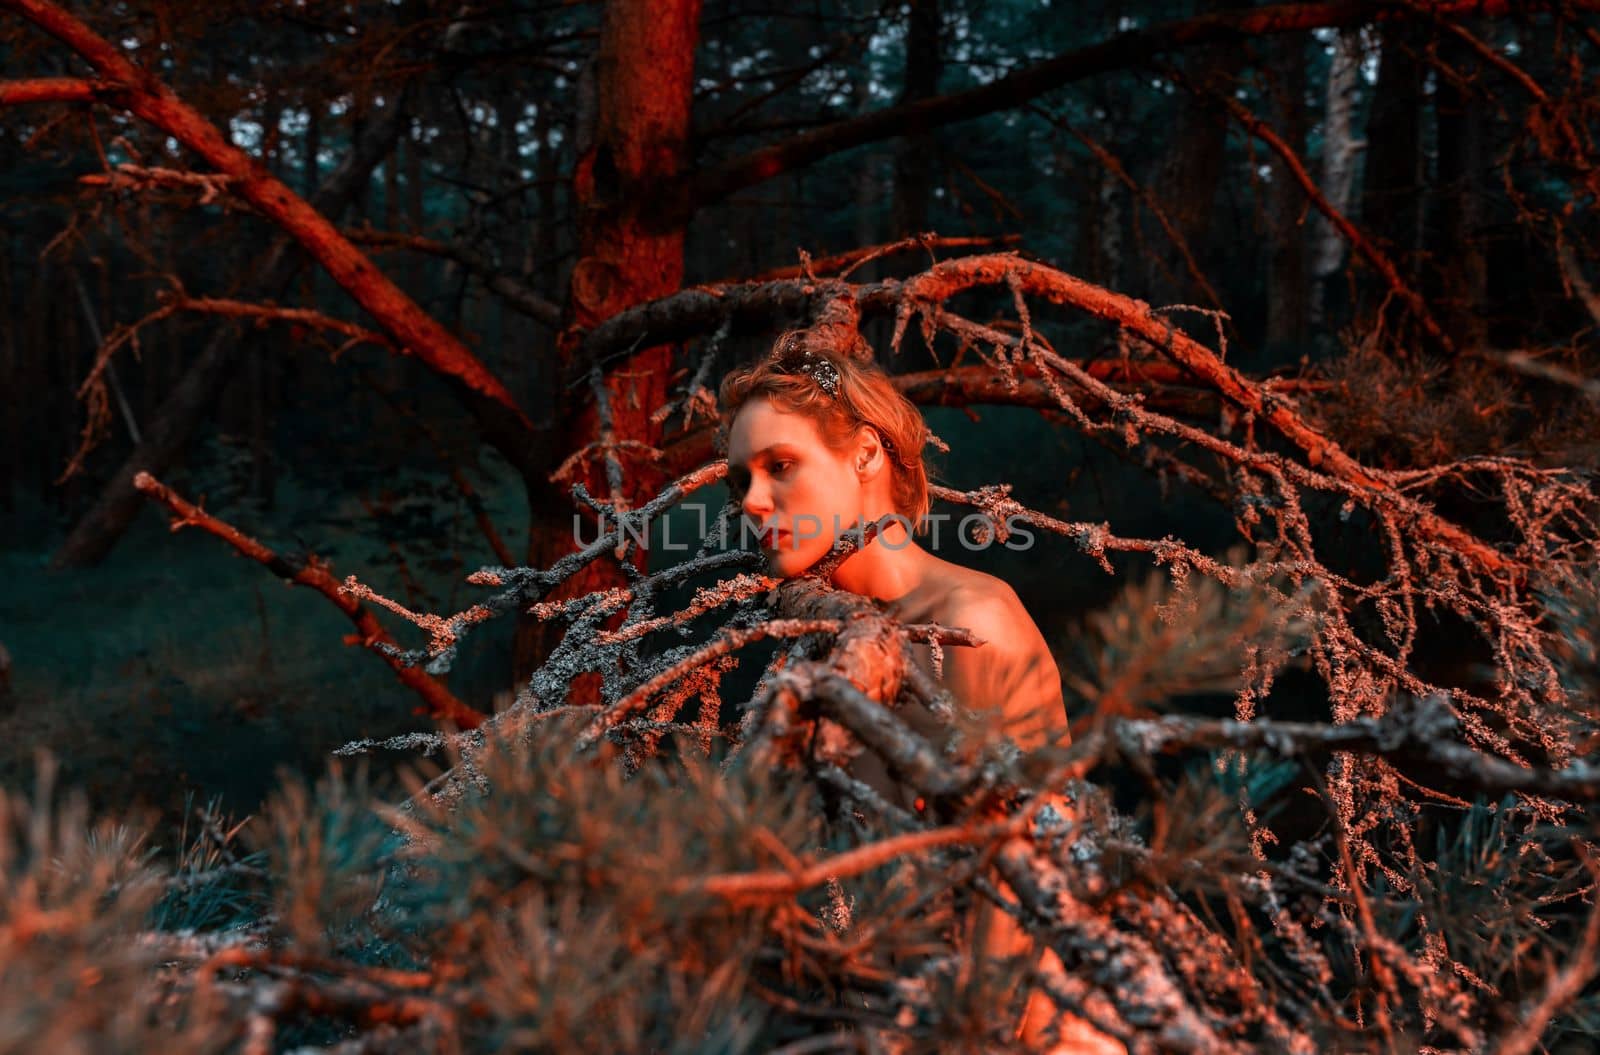 A young nude woman poses in a pine forest among old pines and dry branches, illuminated by the red rays of the setting sun. Nude art image